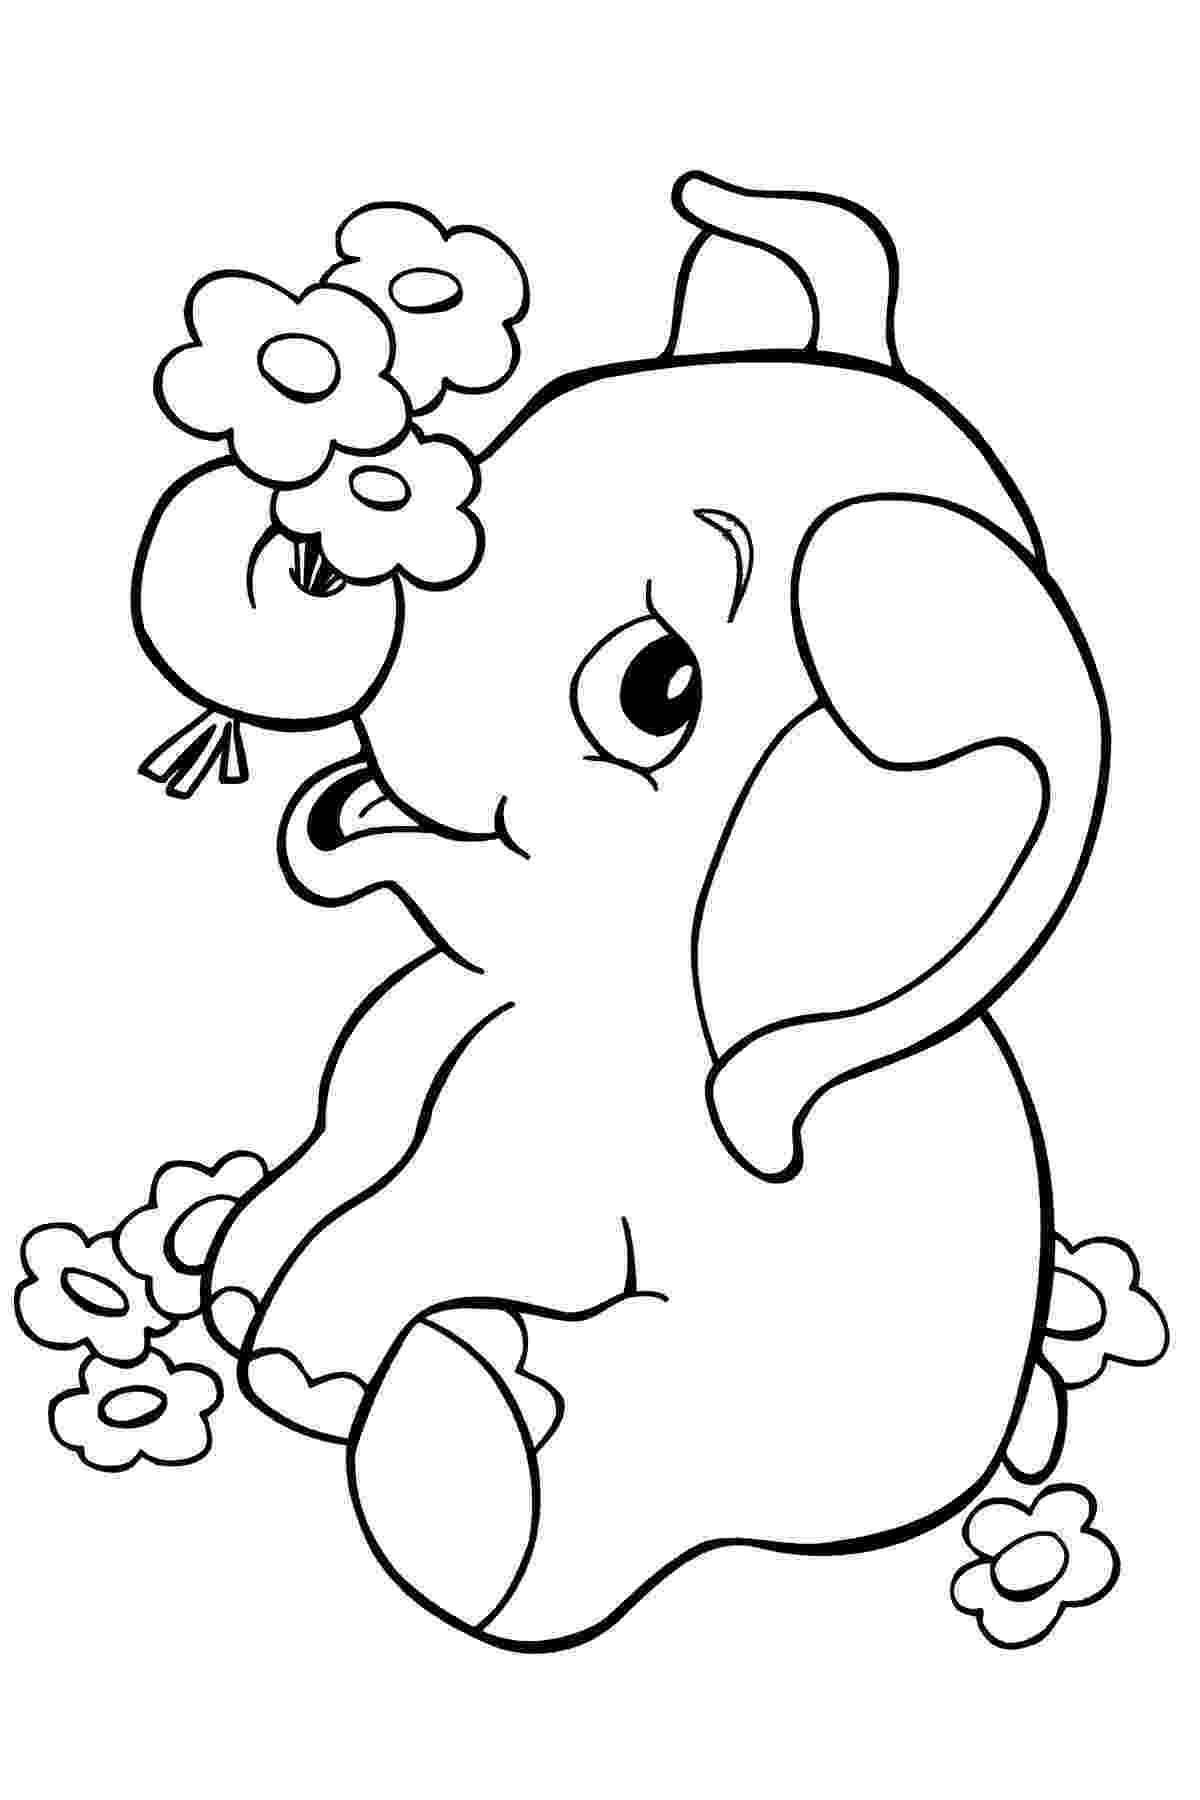 jungle animal coloring book pages jungle coloring pages best coloring pages for kids coloring jungle animal book pages 